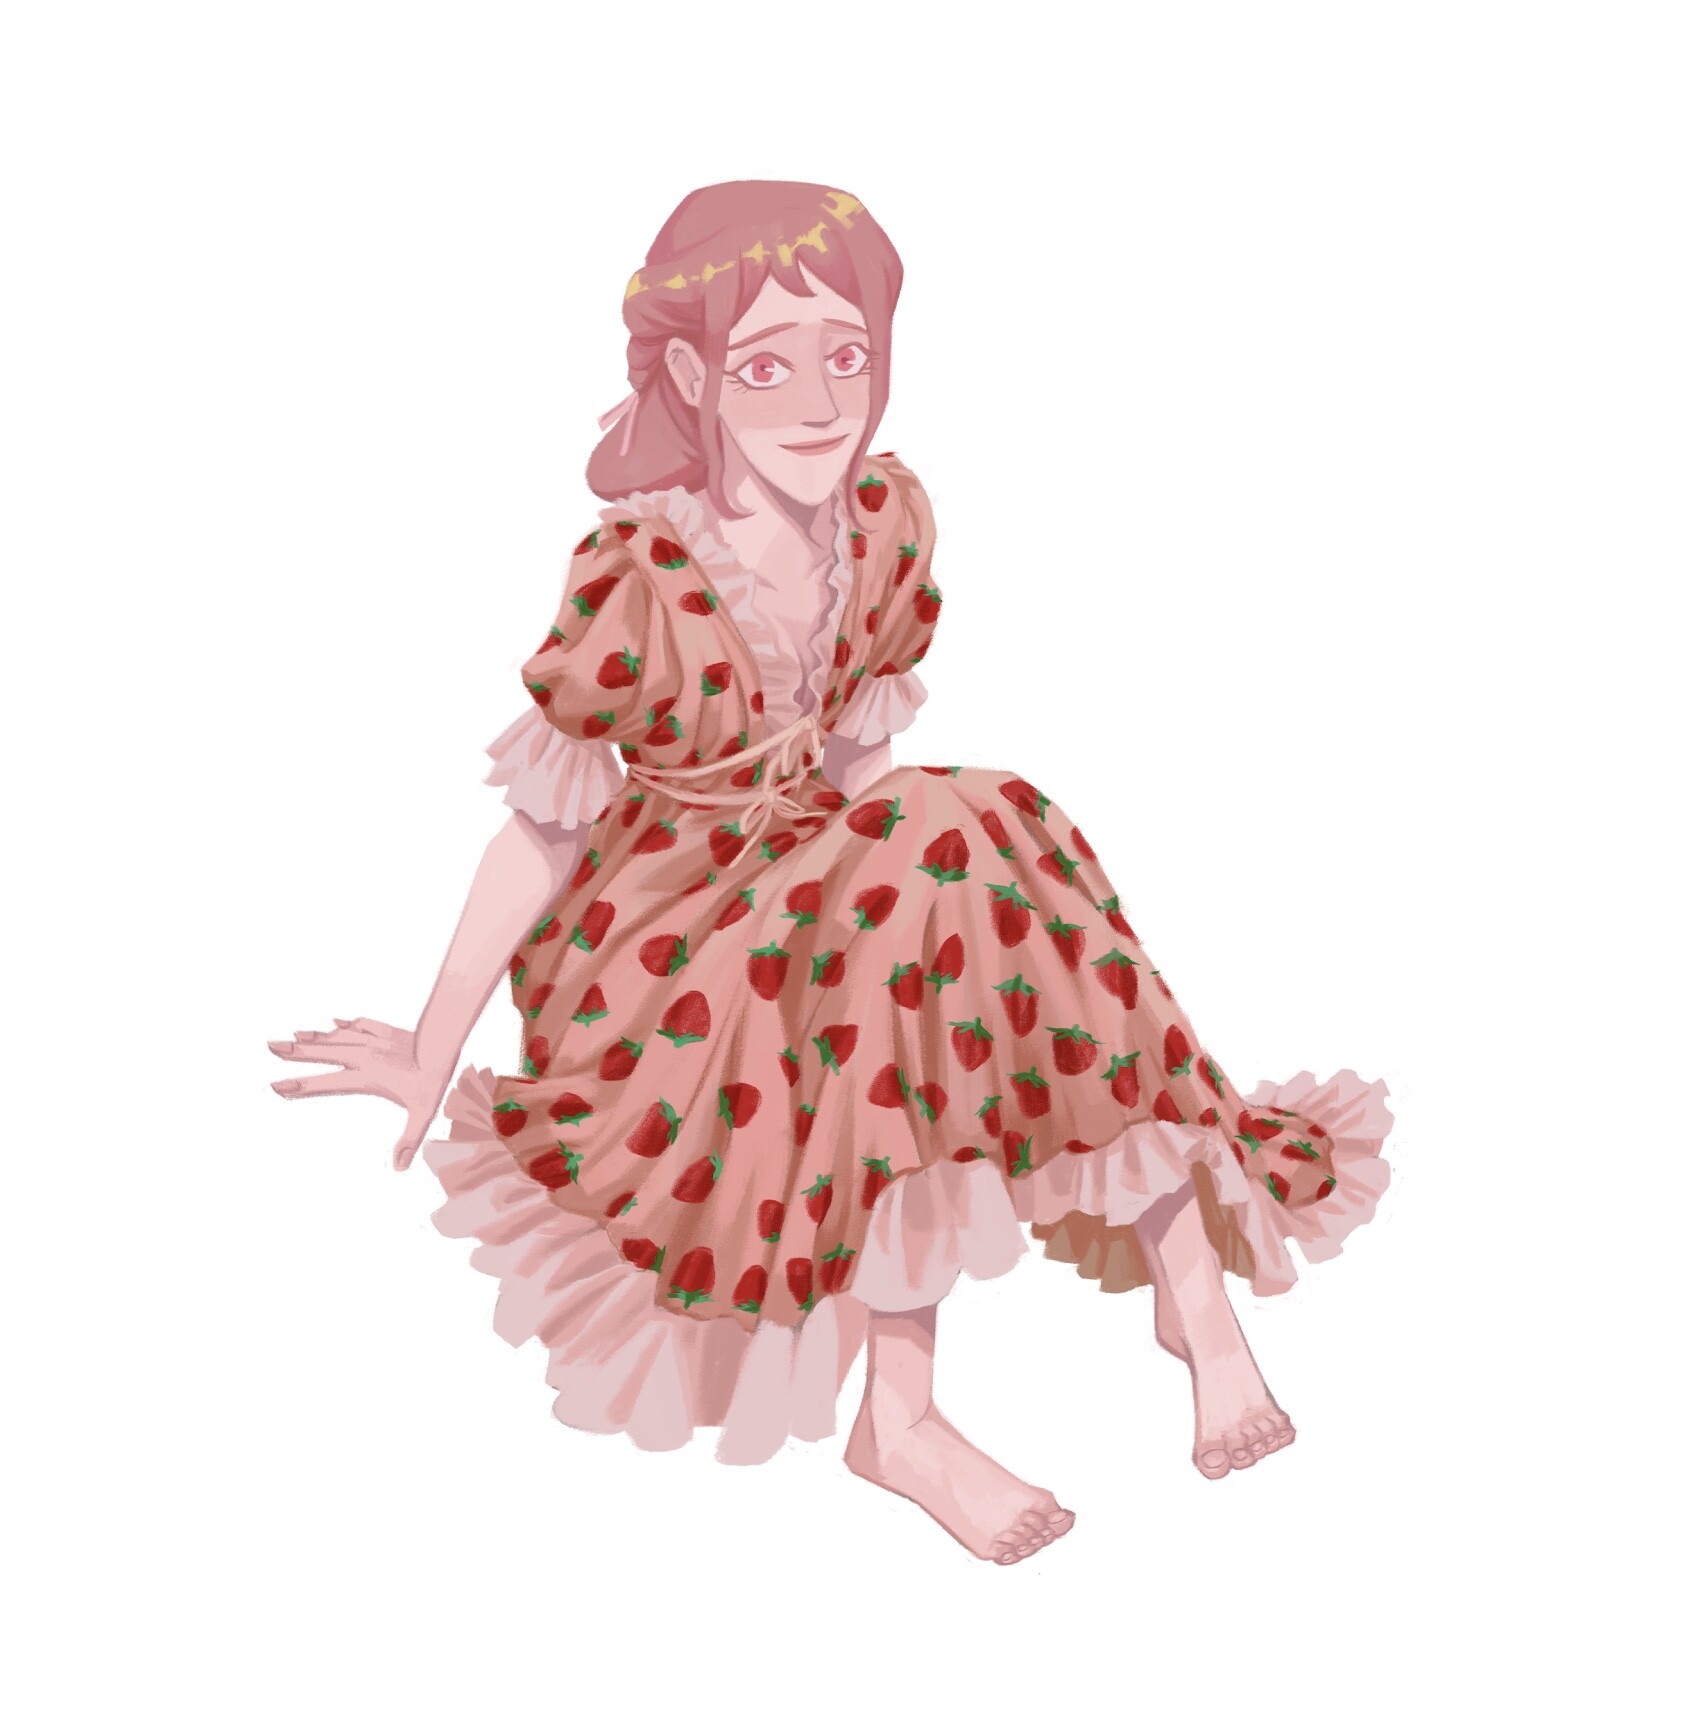 strawberry dress drawing easy